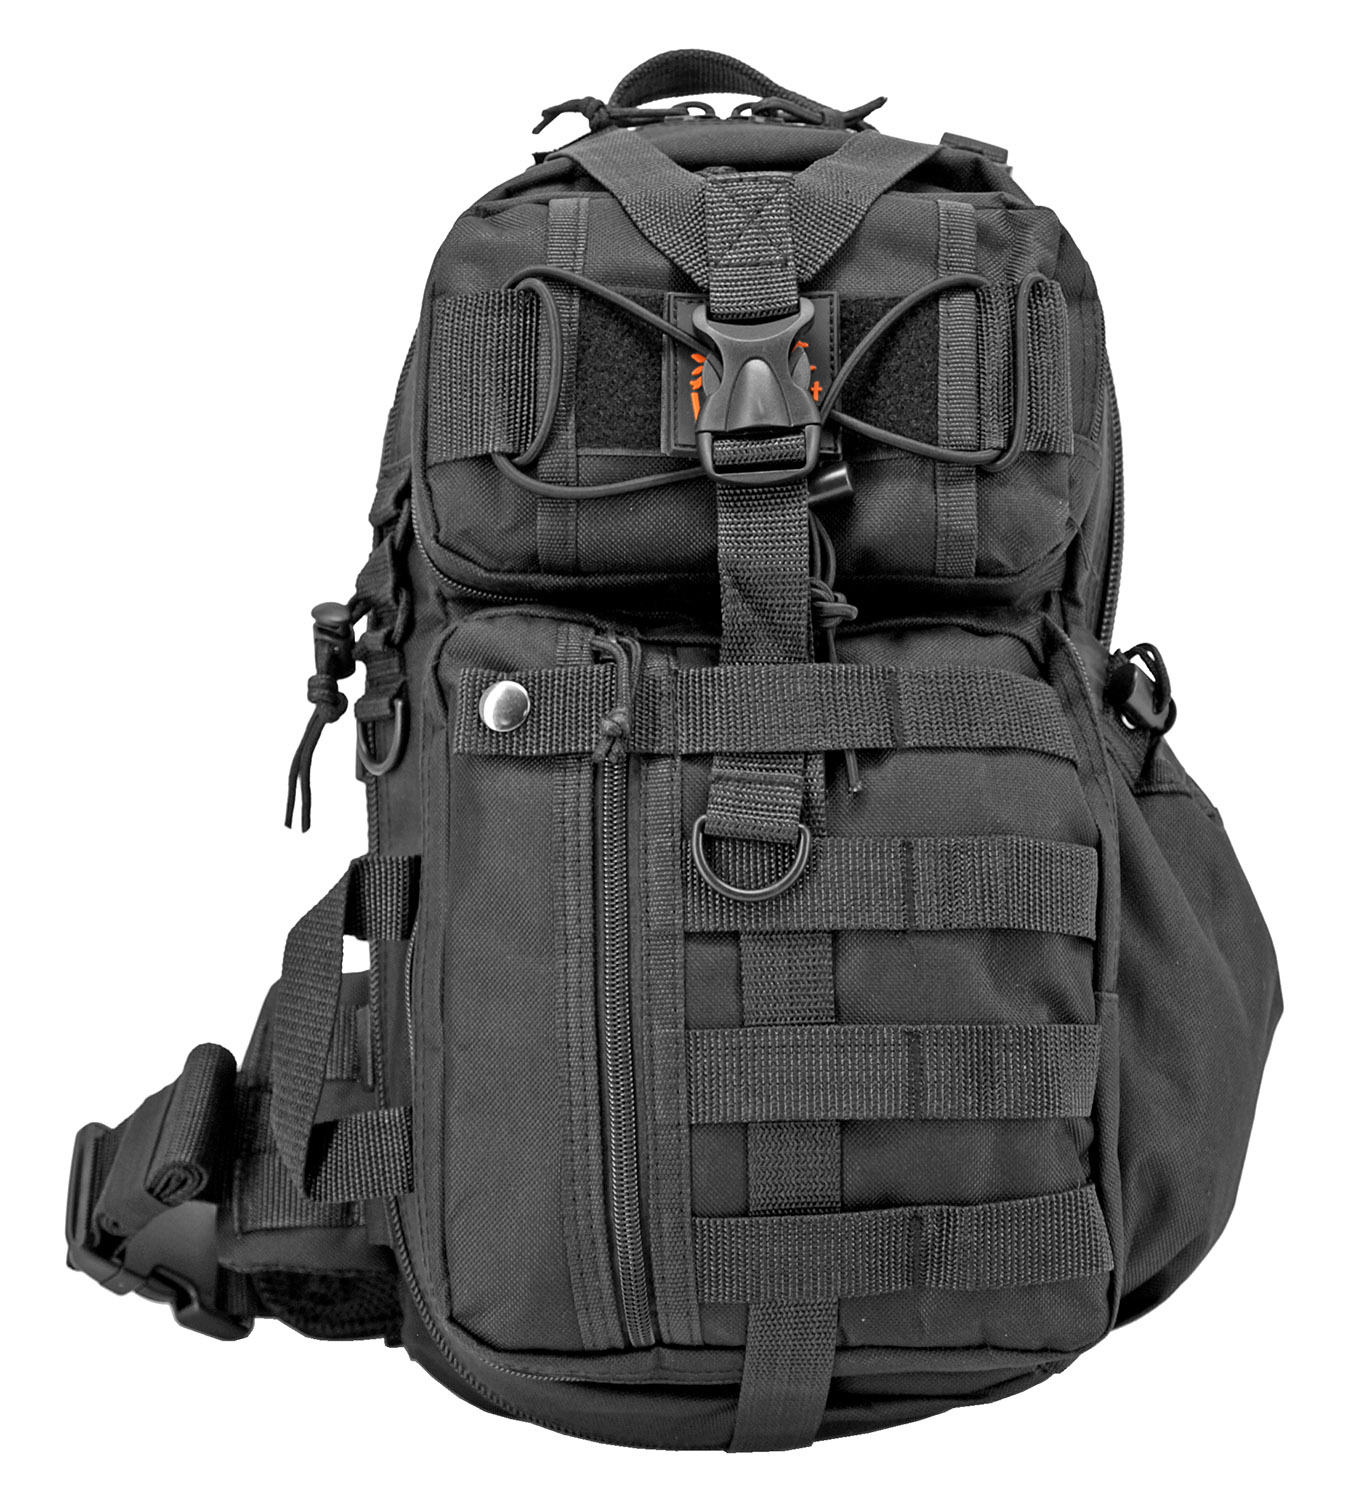 Tactical Readiness Sling Pack - Black